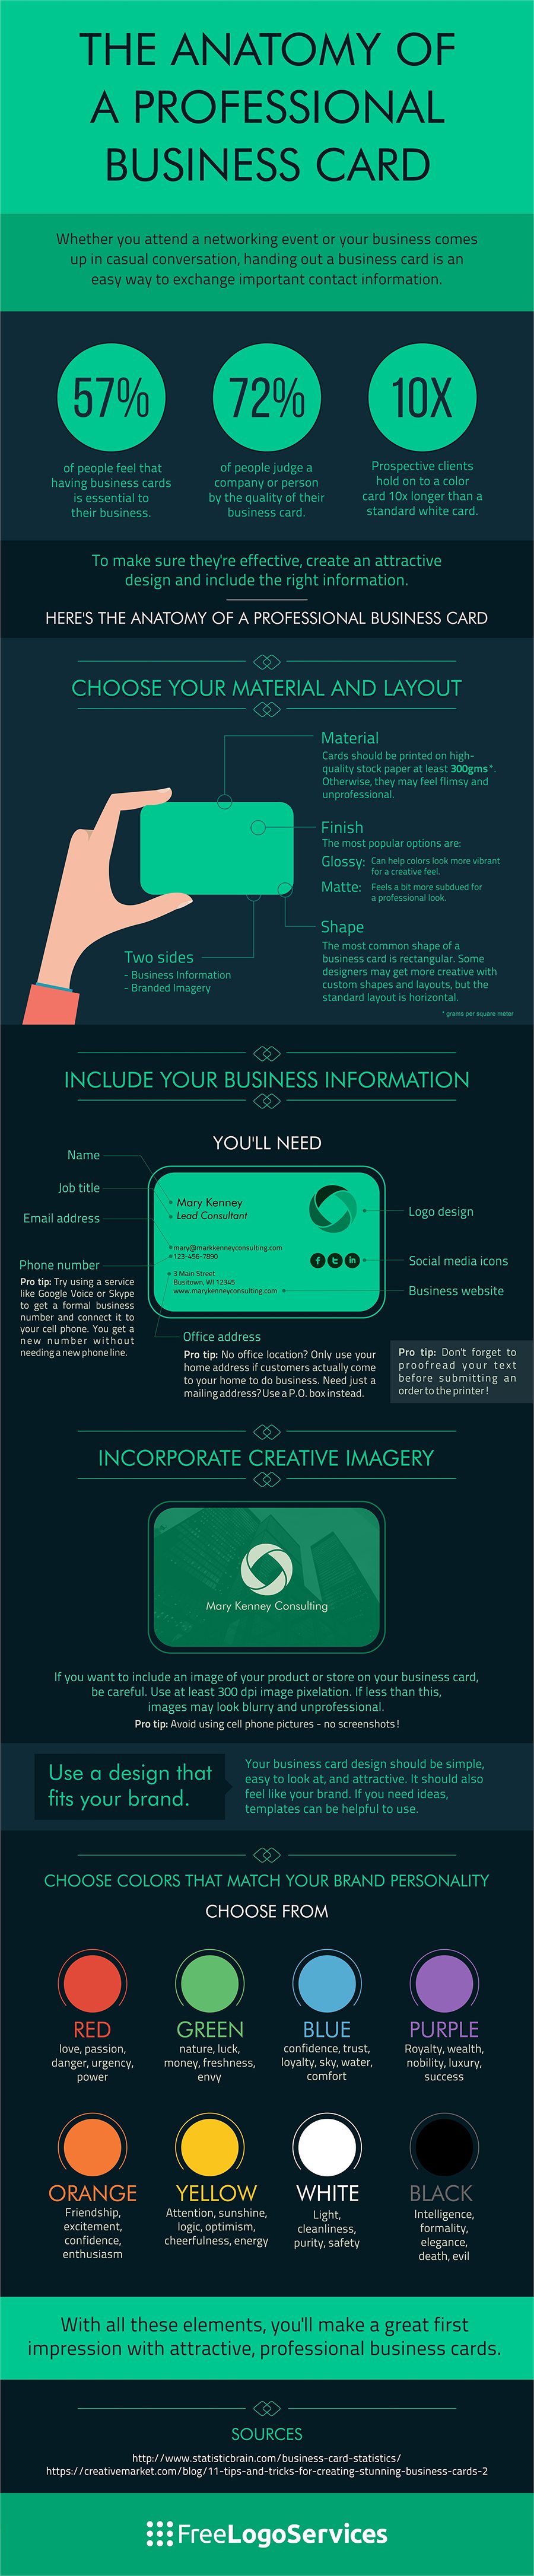 How to Create a Professional Business Card People Won’t Throw Away